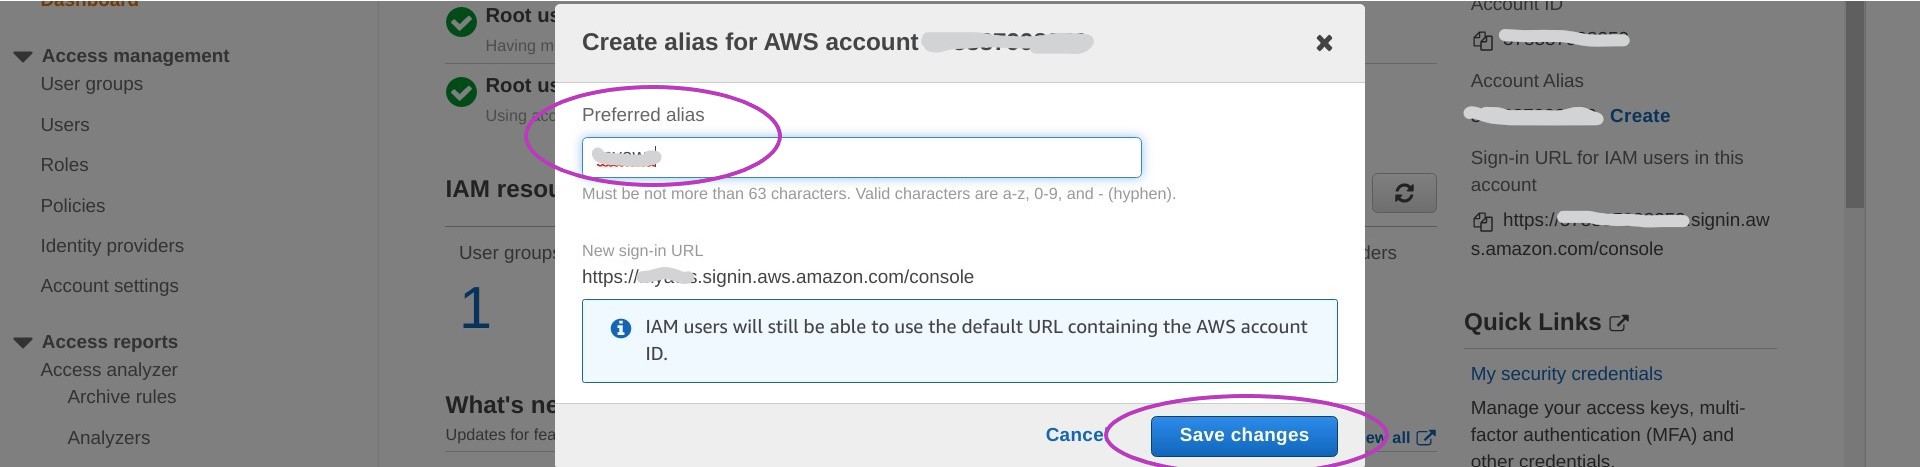 Screen shot of AWS Console Dashboard page in a browser showing pop-up window with box to enter "Preferred alias" and the button "Save changes" circled